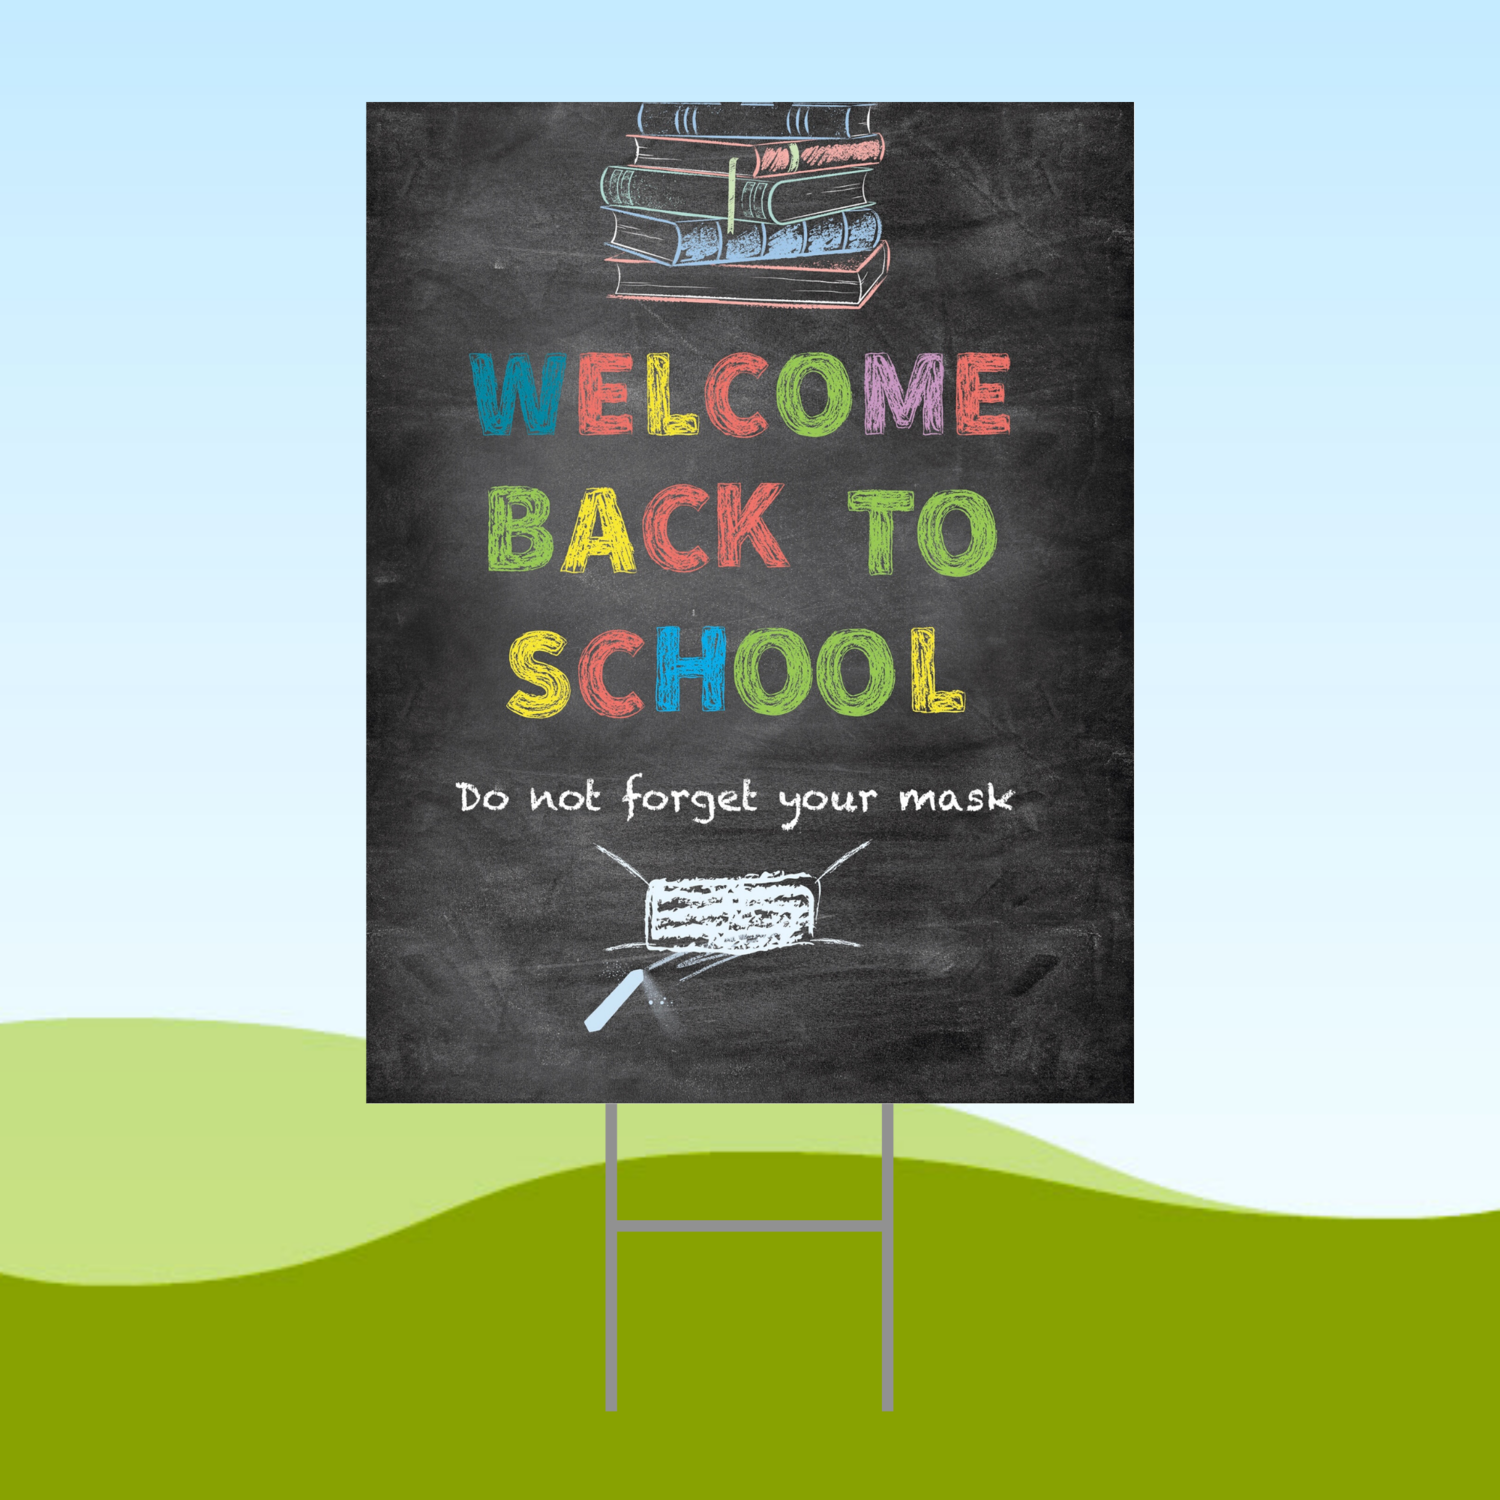 Welcome Back To School Mask 18x24 Yard Sign WITH STAKE Corrugated Plastic Bandit